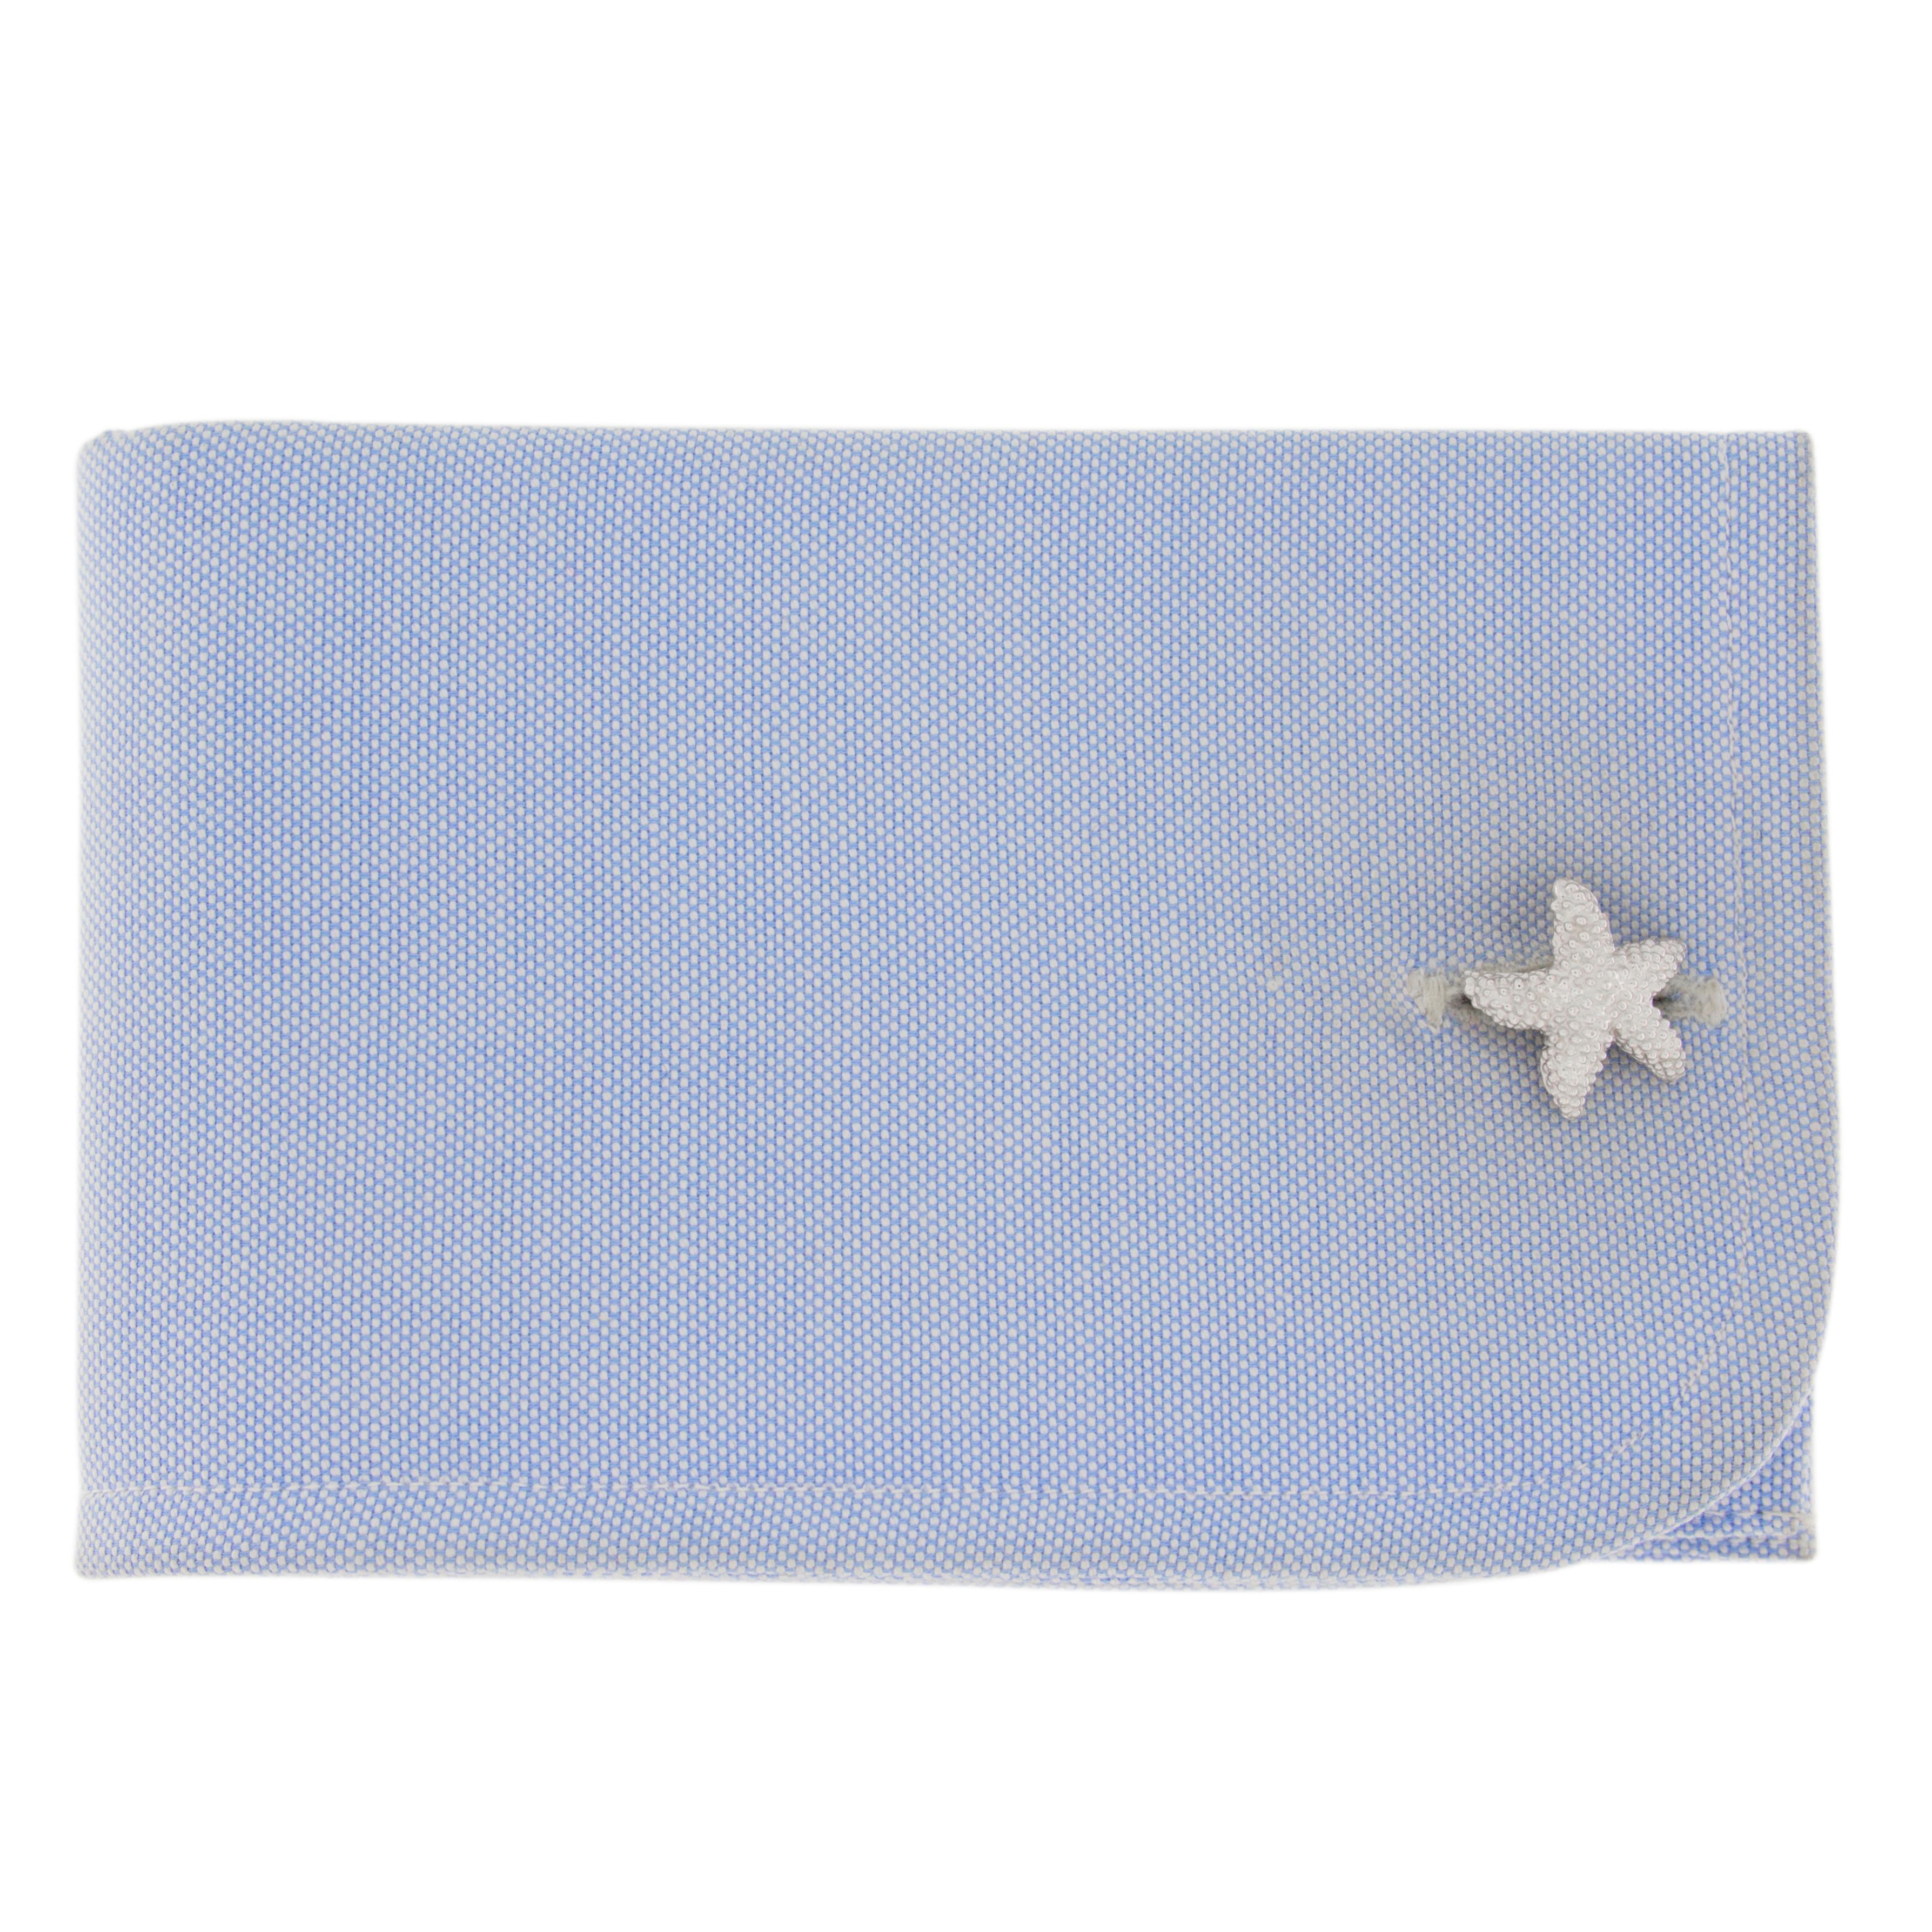 Jona design collection, hand crafted in Italy, starfish sterling silver rhodium plated cufflinks.  Marked JONA.
All Jona jewelry is new and has never been previously owned or worn. Each item will arrive at your door beautifully gift wrapped in Jona